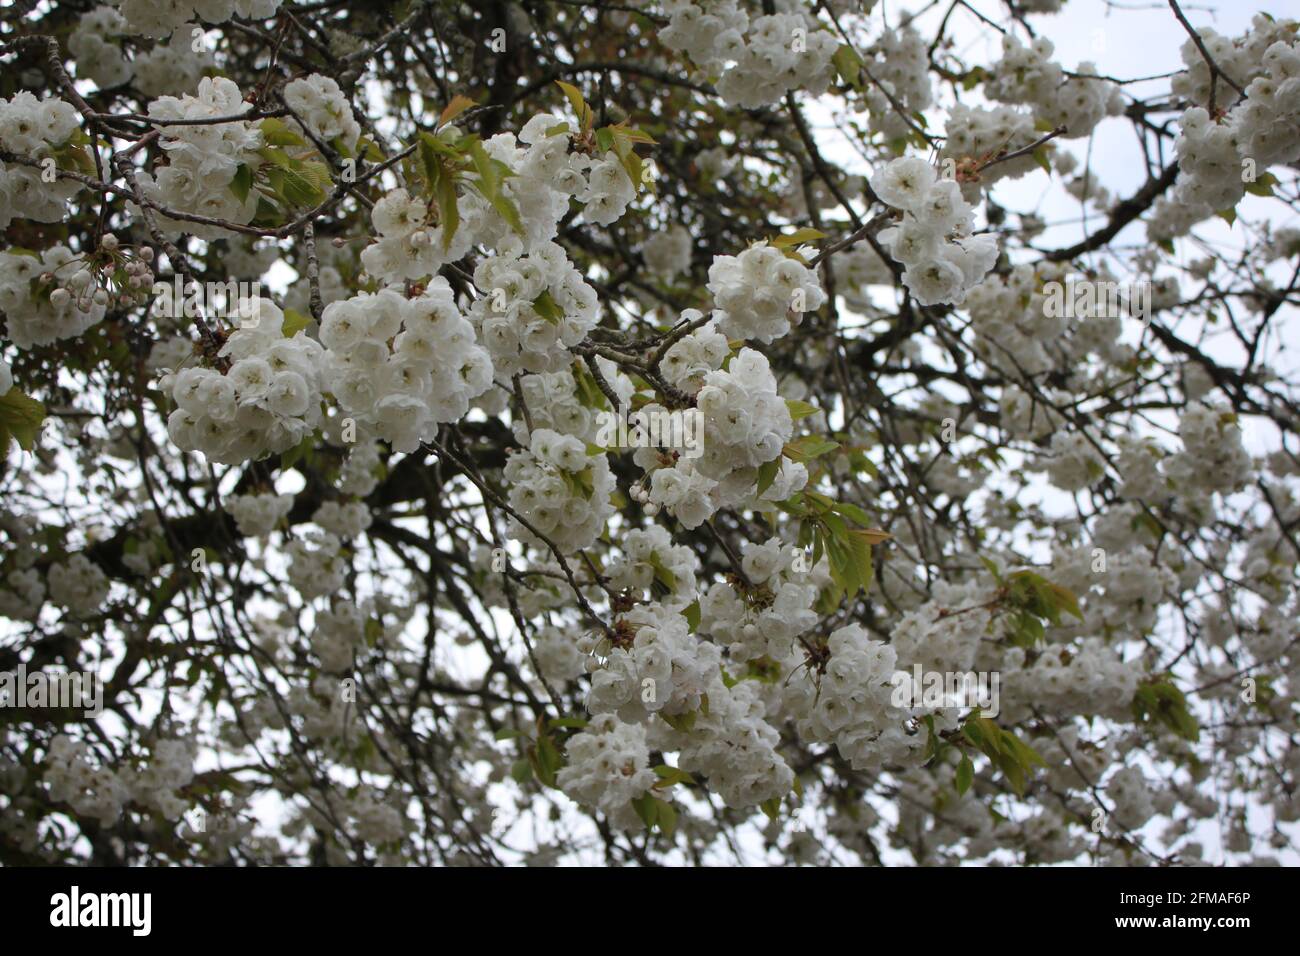 Clusters of white blossoms growing on a tree. Images of spring, love spring. Spring wedding images. White flowers in nature, beautiful blooms, UK. Stock Photo